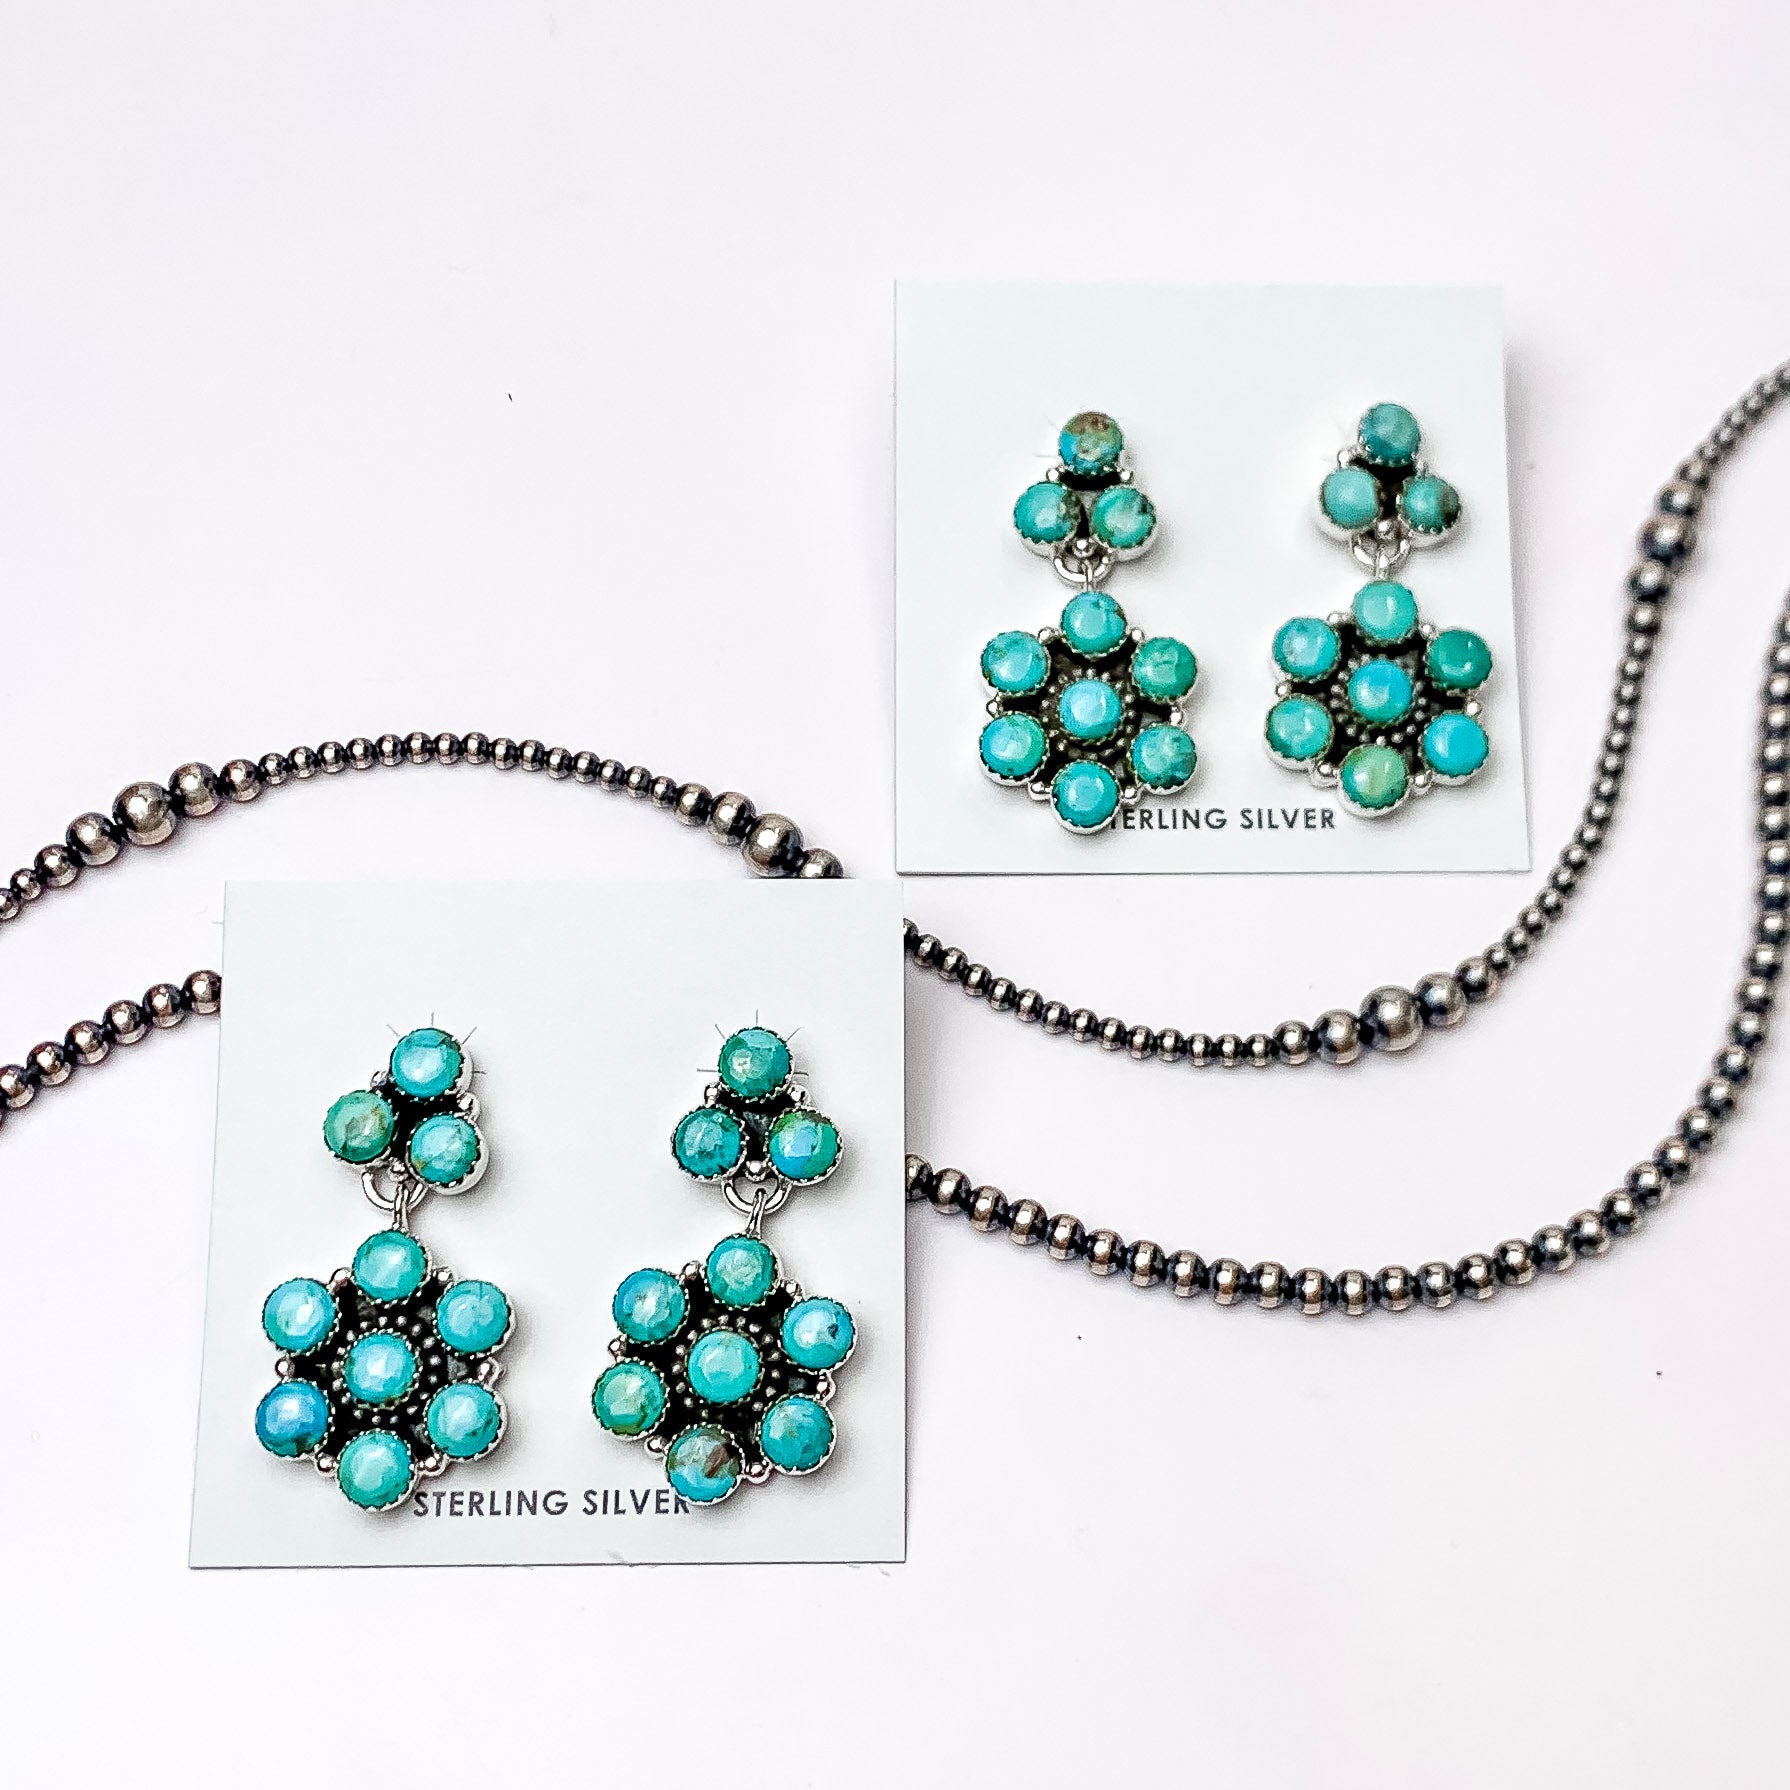 In the picture are sterling silver circle cluster stud with a flower drop earrings in kingman turquoise with a white background